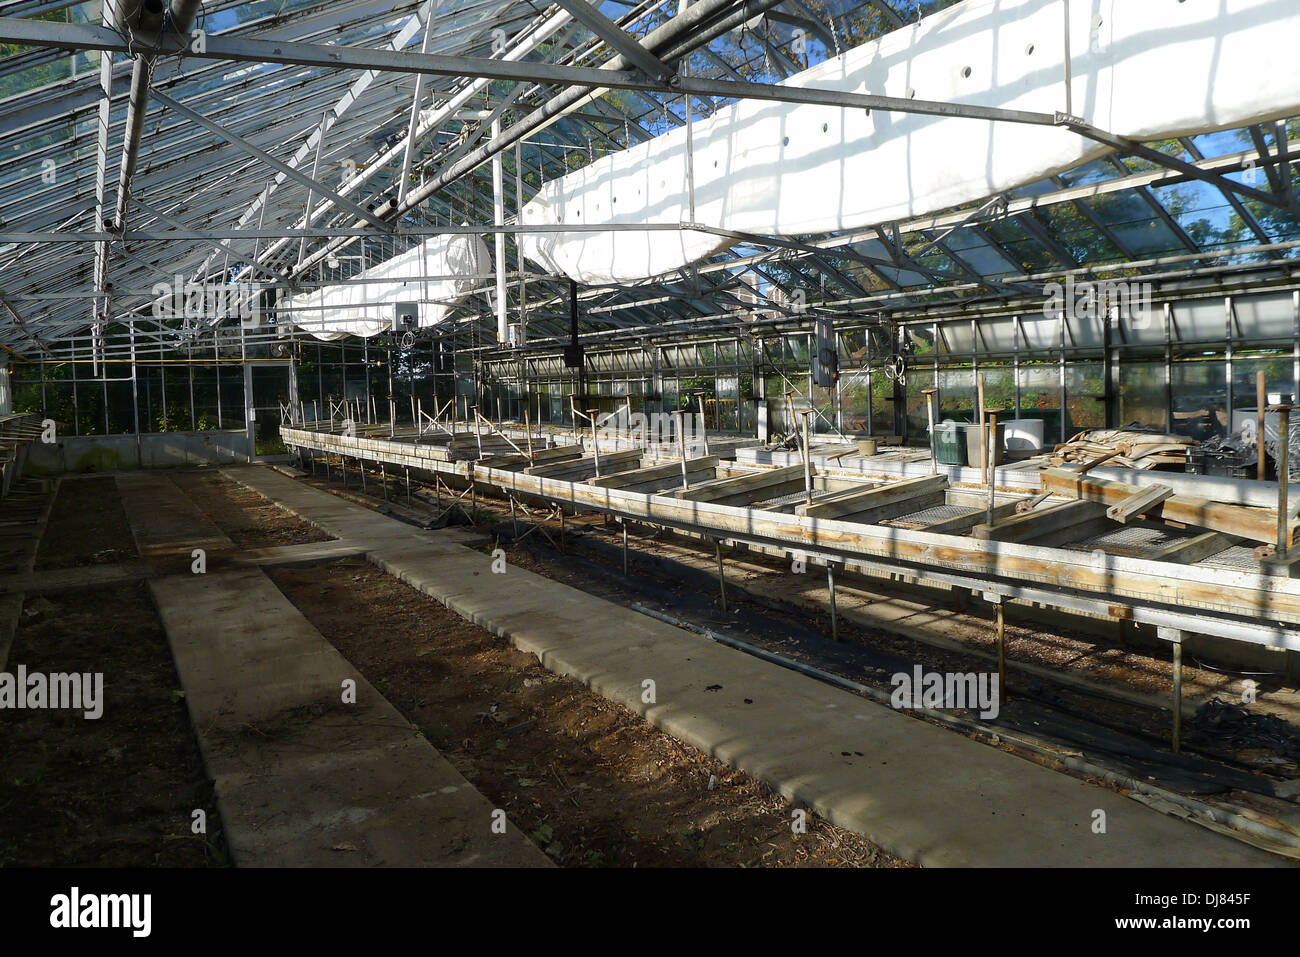 A large empty commercial greenhouse that is about to undergo repair and restoration. Stock Photo